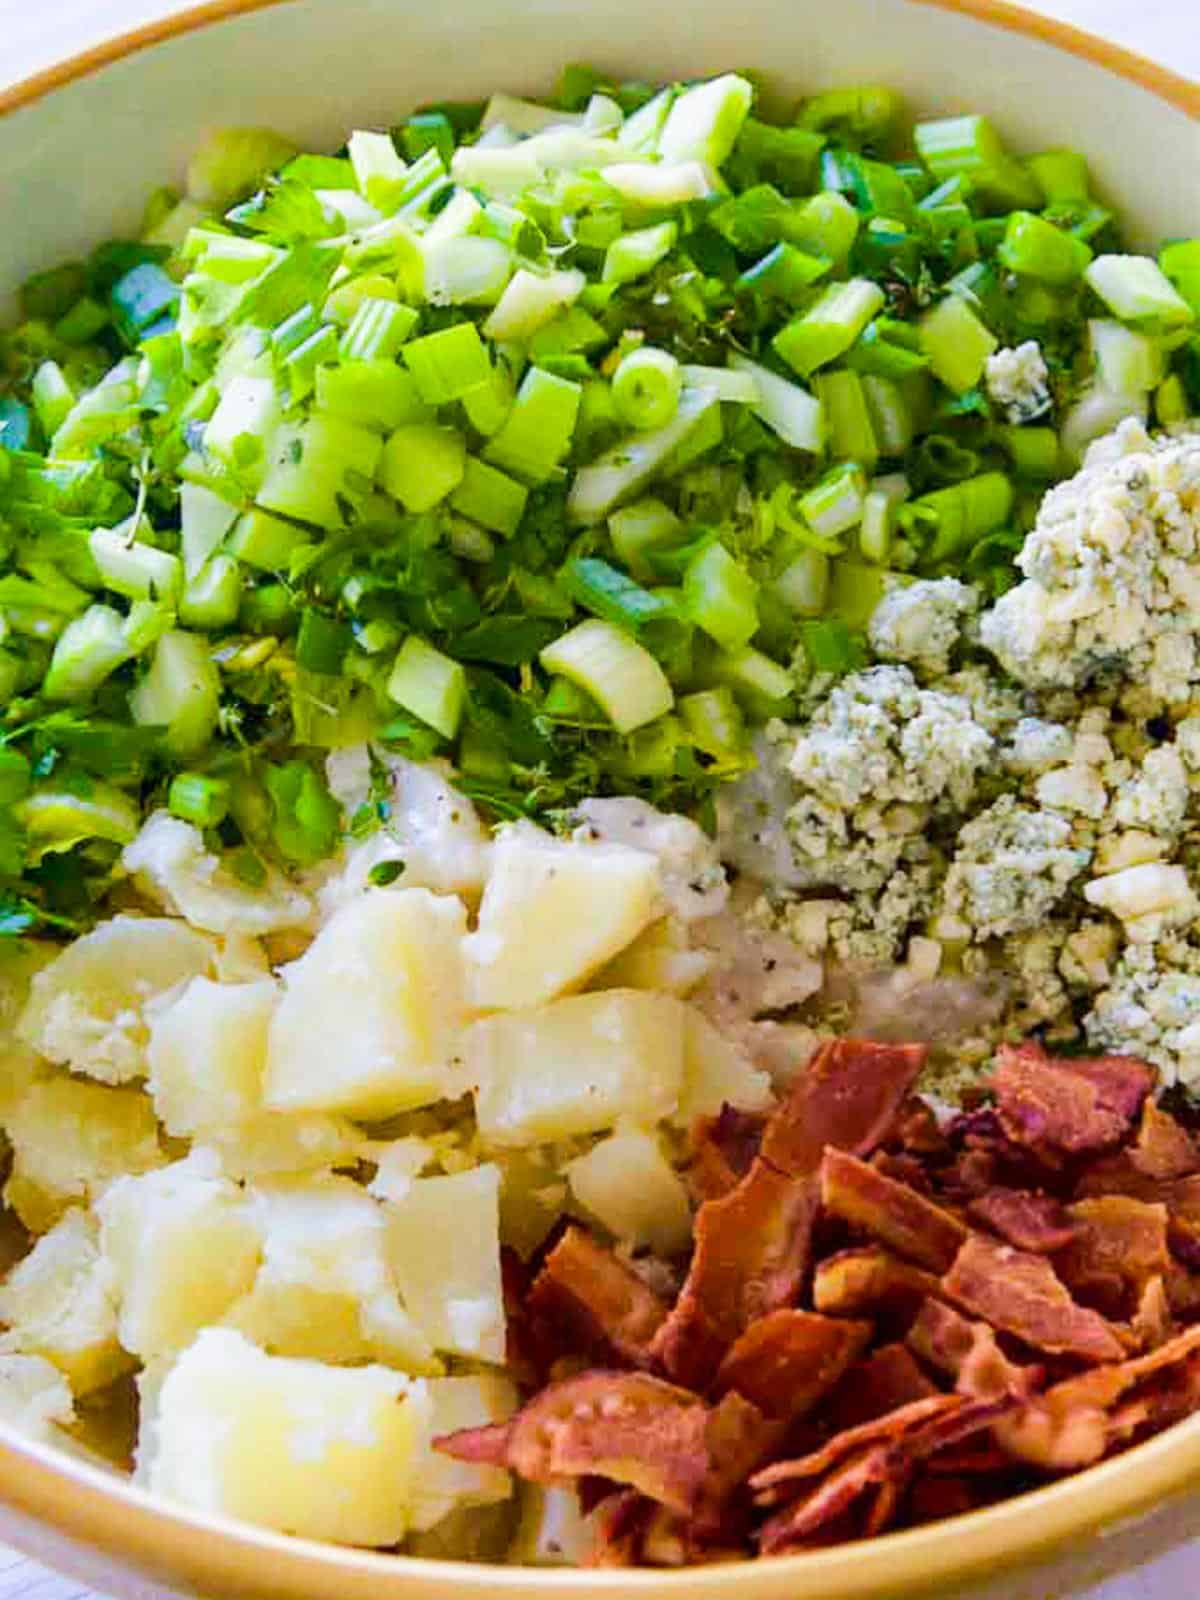 A large mixing bowl with all the ingredients needed for a bacon potato salad recipe loaded inside before mixing those ingredients.